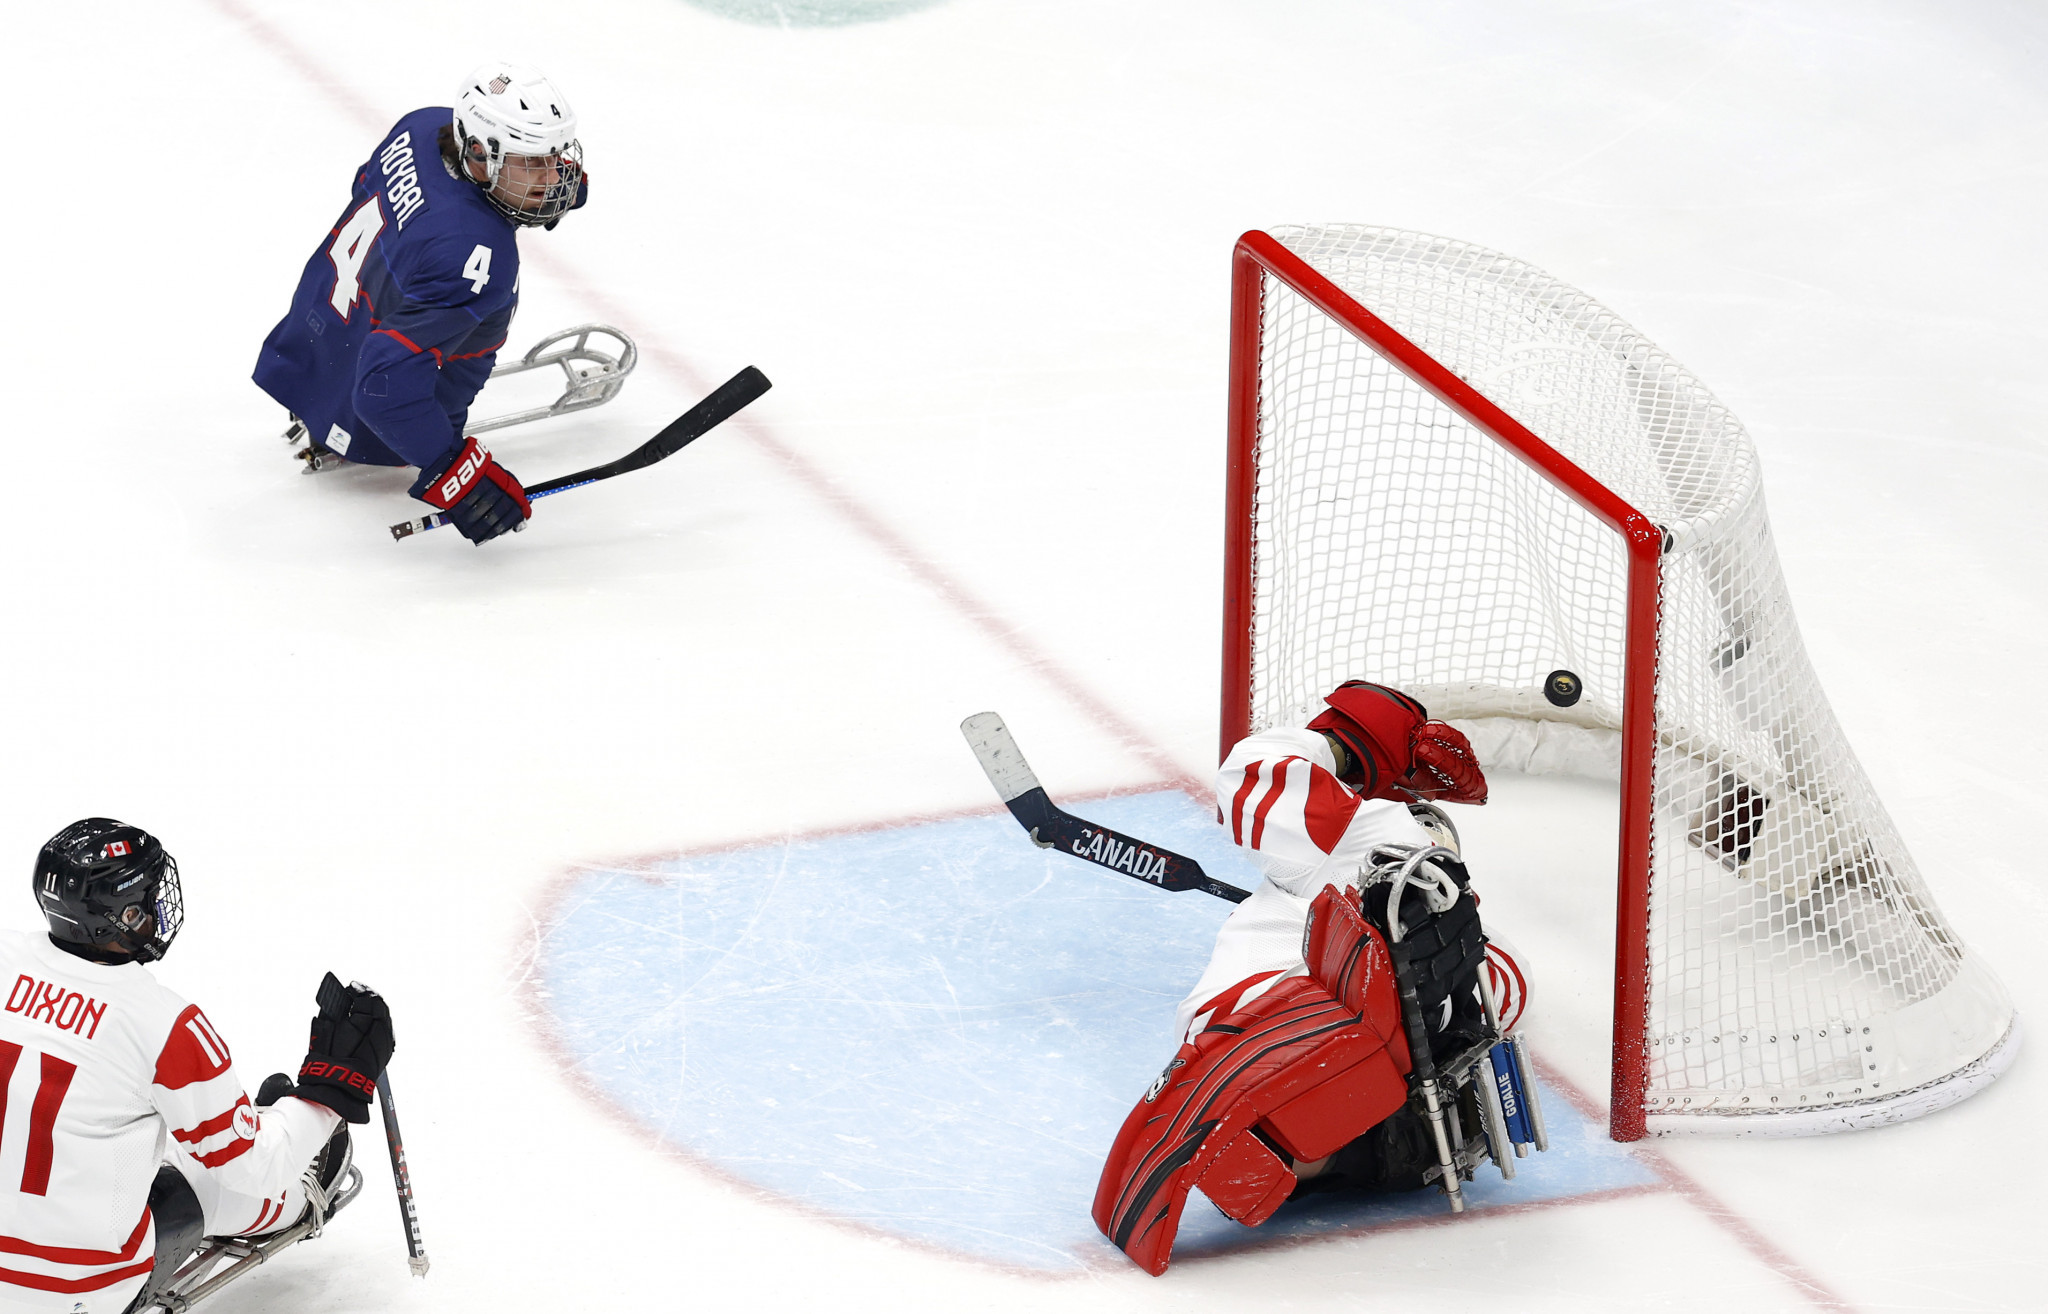 Dominic Larocque, right, made a catastrophic mistake to allow Brody Roybal, blue, to score the United States' second goal ©Getty Images